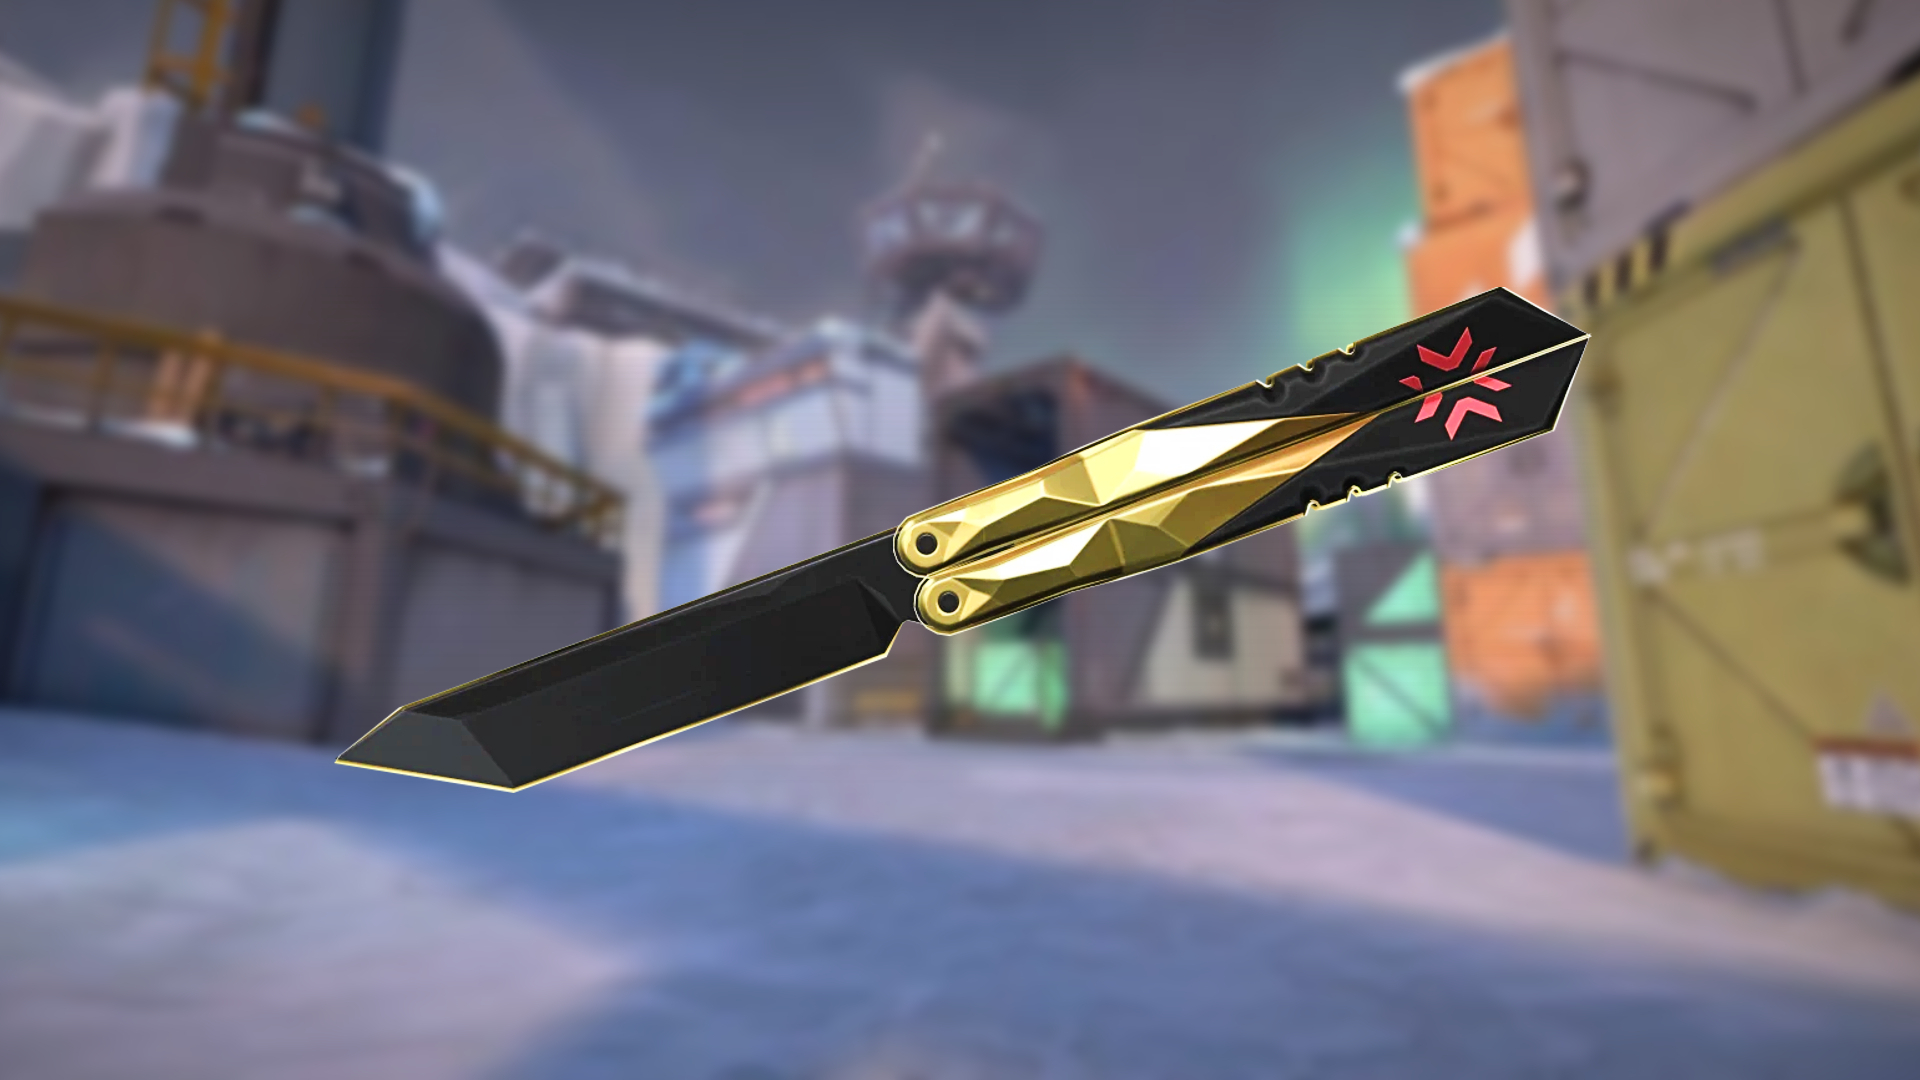 Valorant dev commends player who memorized all butterfly knife tricks